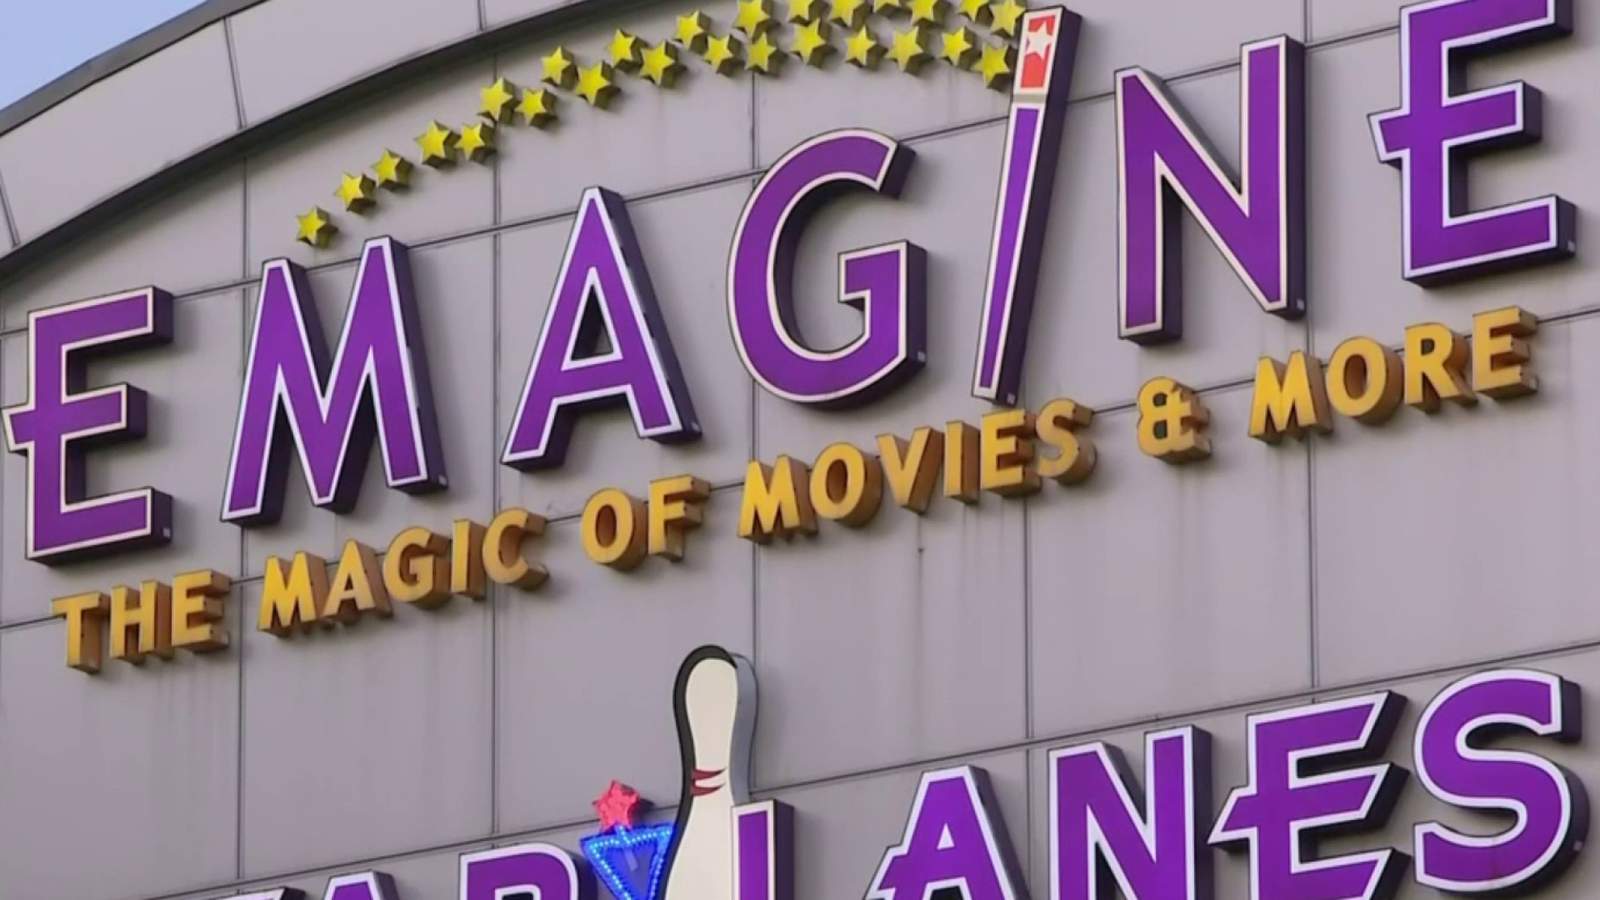 Emagine to reopen Michigan theaters on Oct. 9 with free tickets for frontline workers